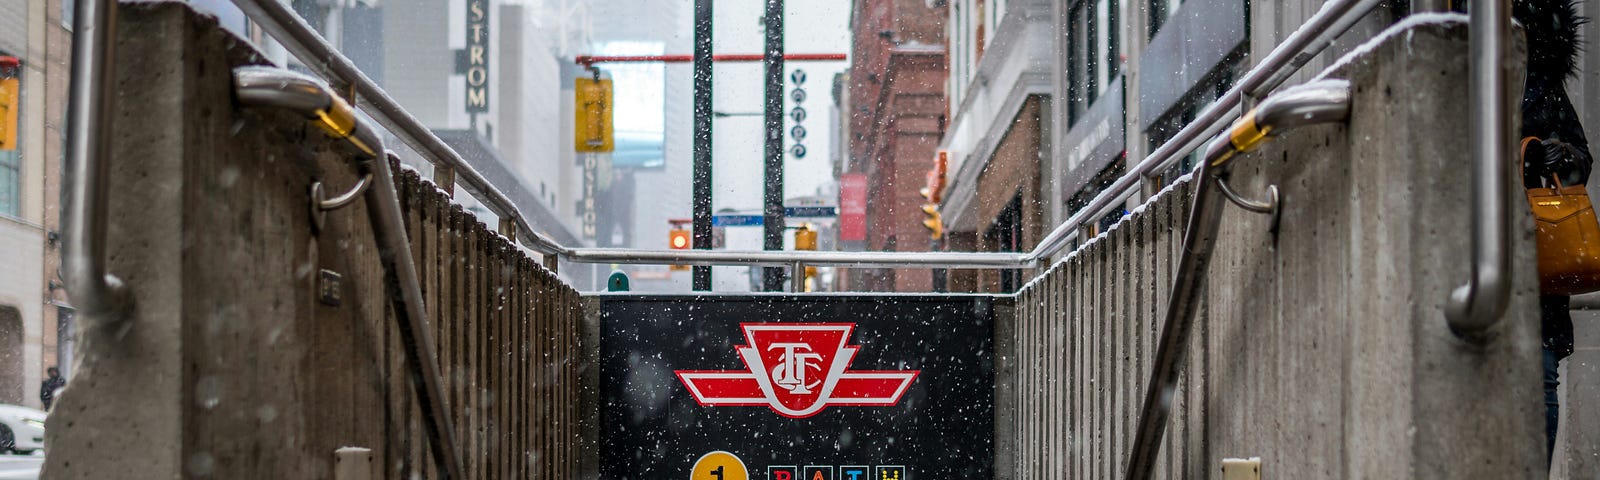 Subway entrance with sign saying ‘queen’